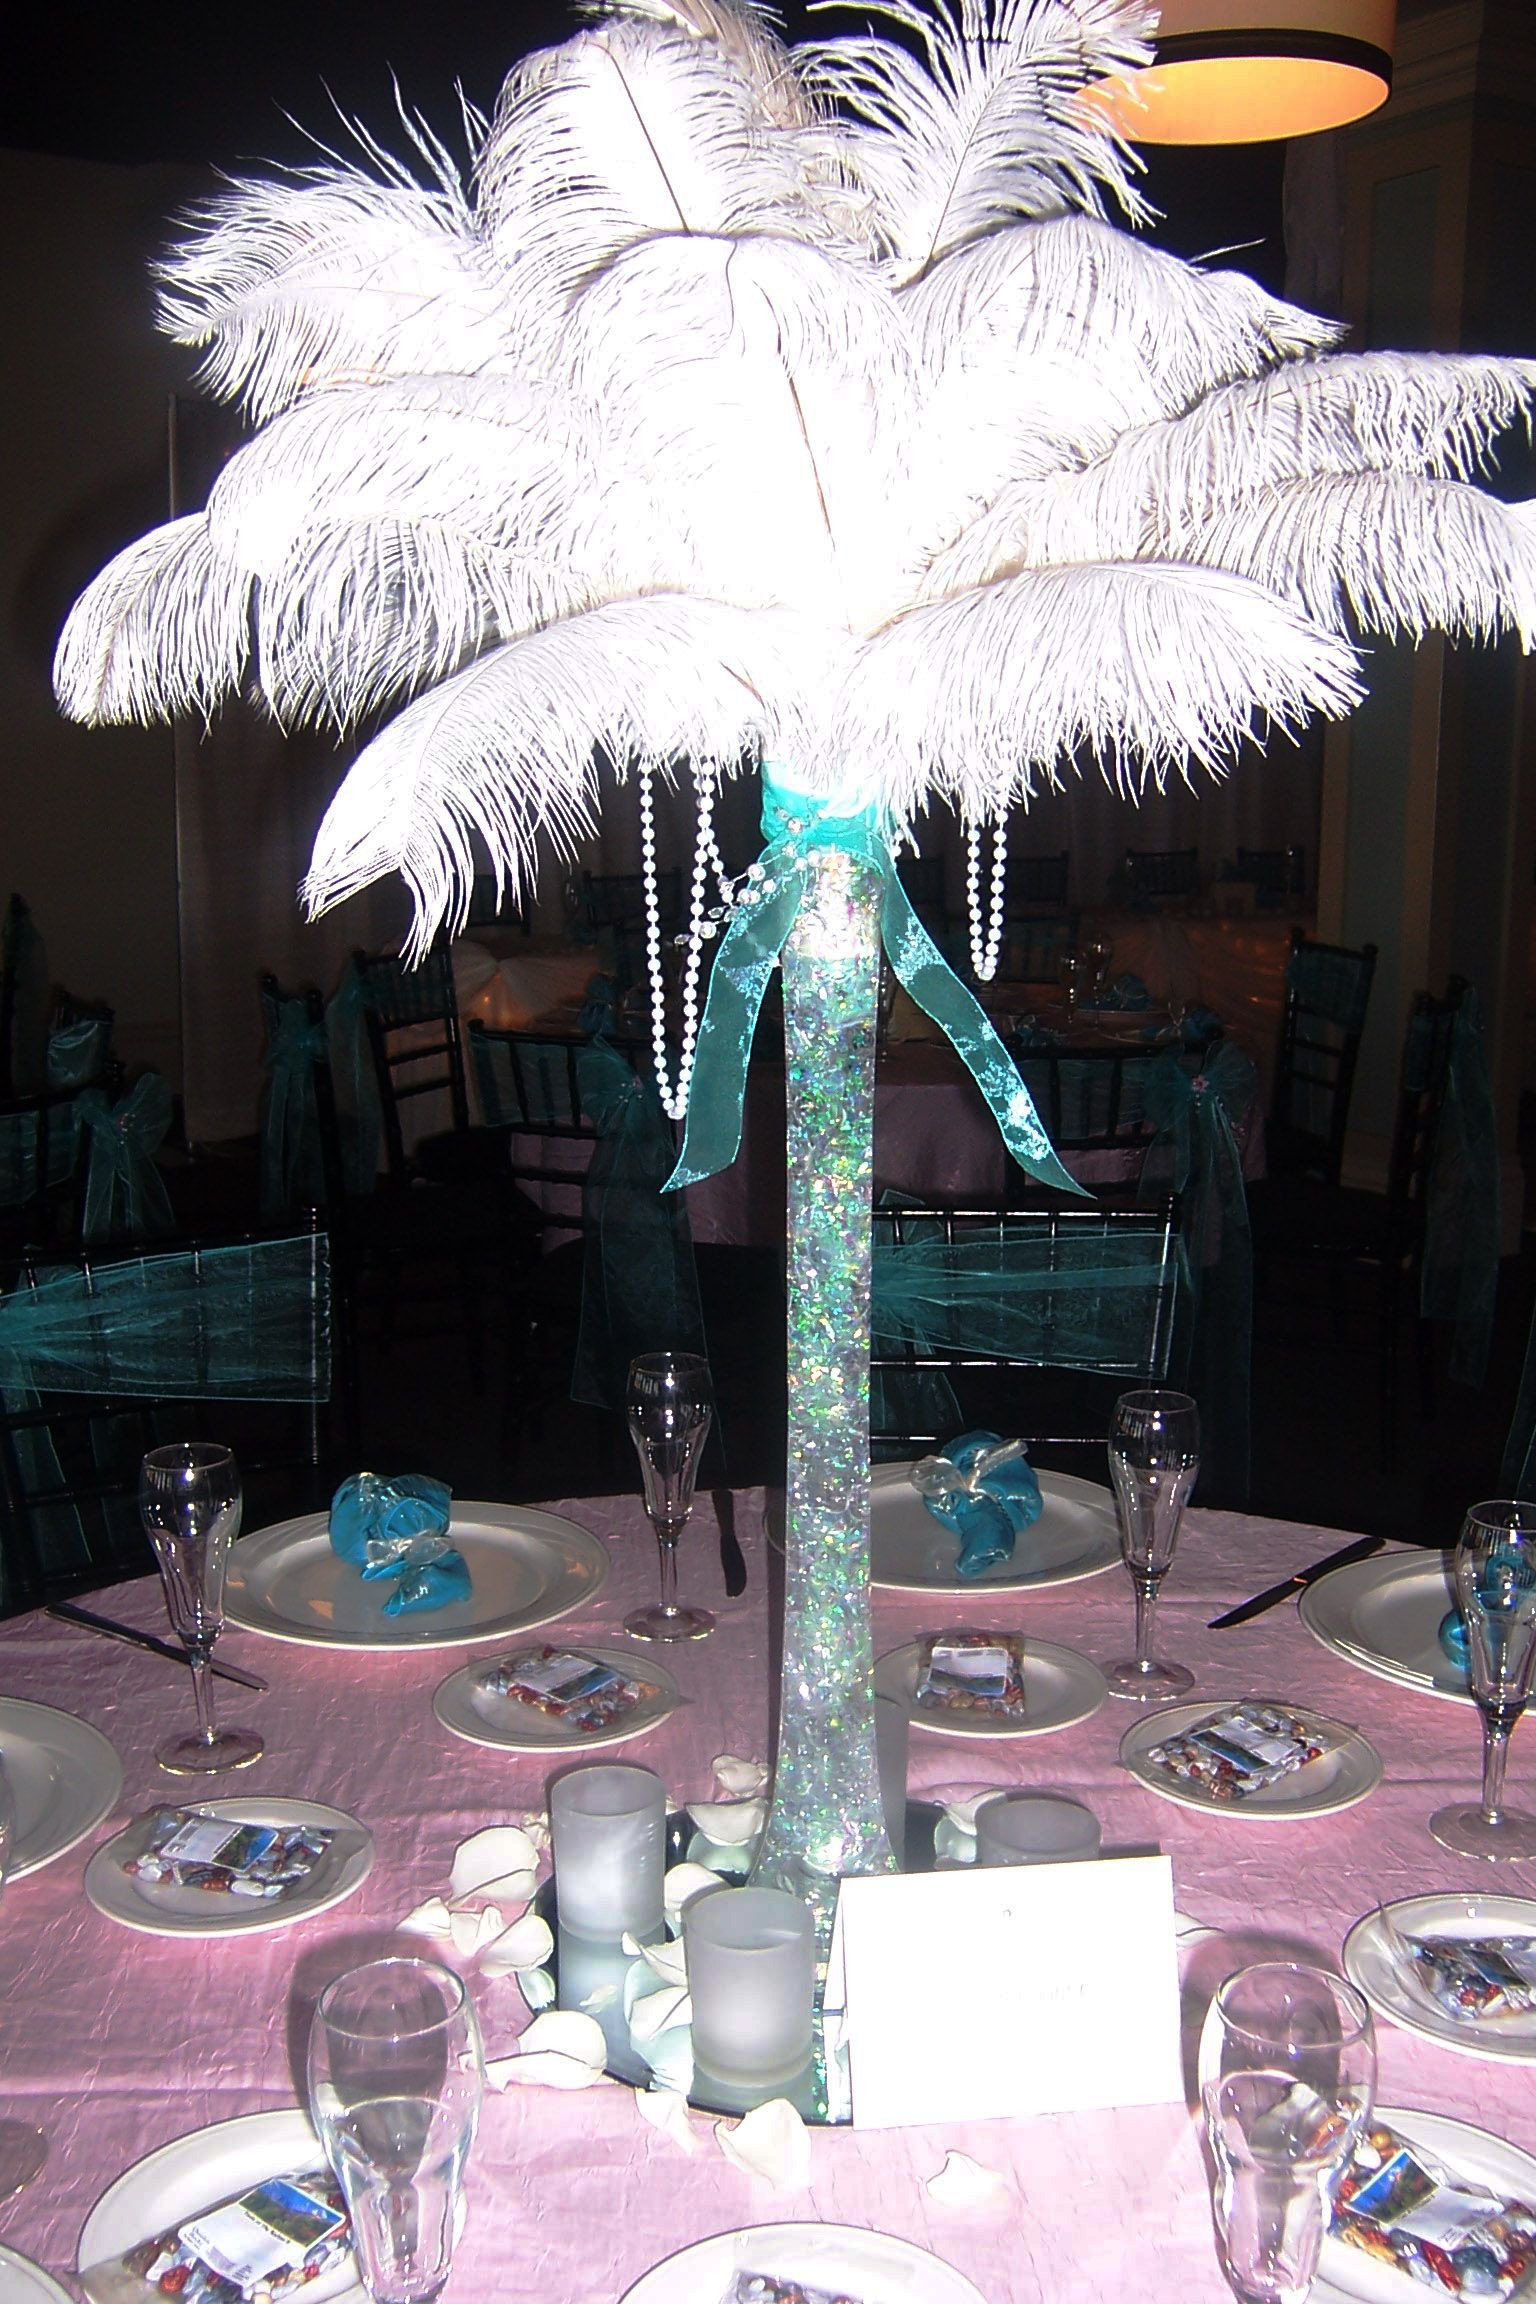 Eiffel tower Vase Light Base Of Feather Centerpiece with Lighted Vase Happenings Prom Pinterest Regarding Feather Centerpiece with Lighted Vase Happenings